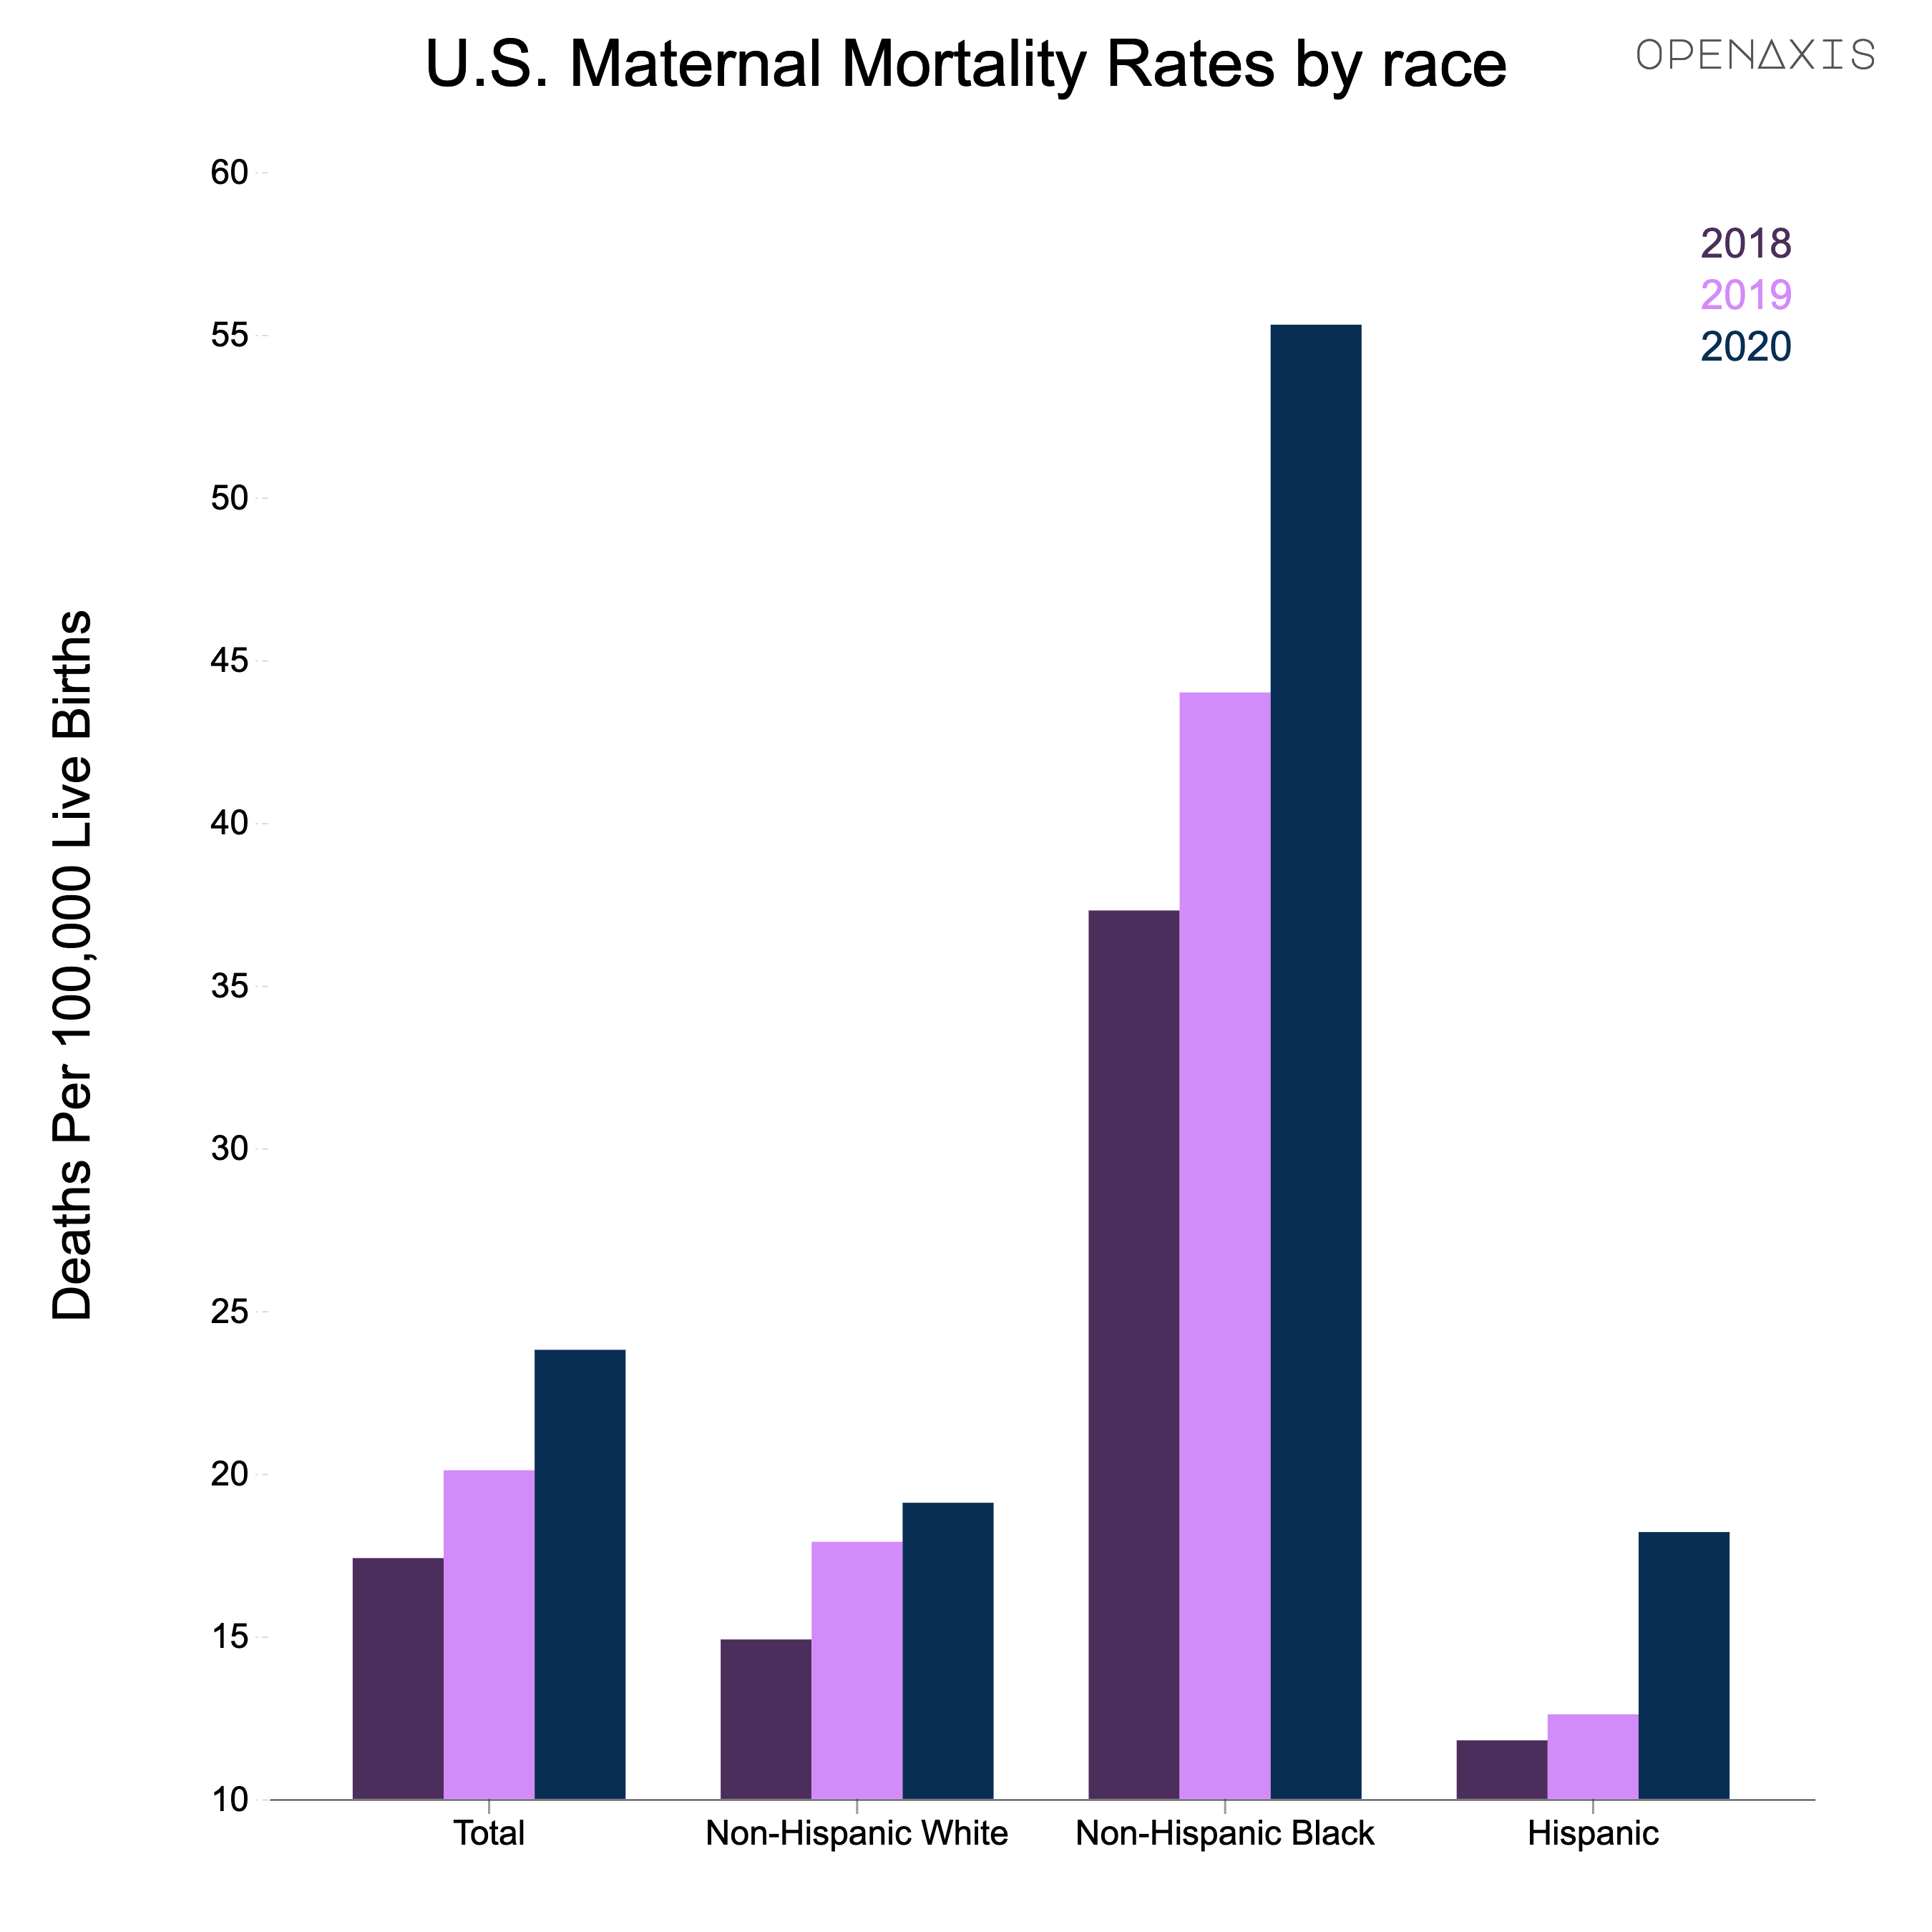 Source: <a href="/data/3728">CDC, National Center for Health Statistics, National Vital Statistics System, Mortality and Natality.</a><br/>